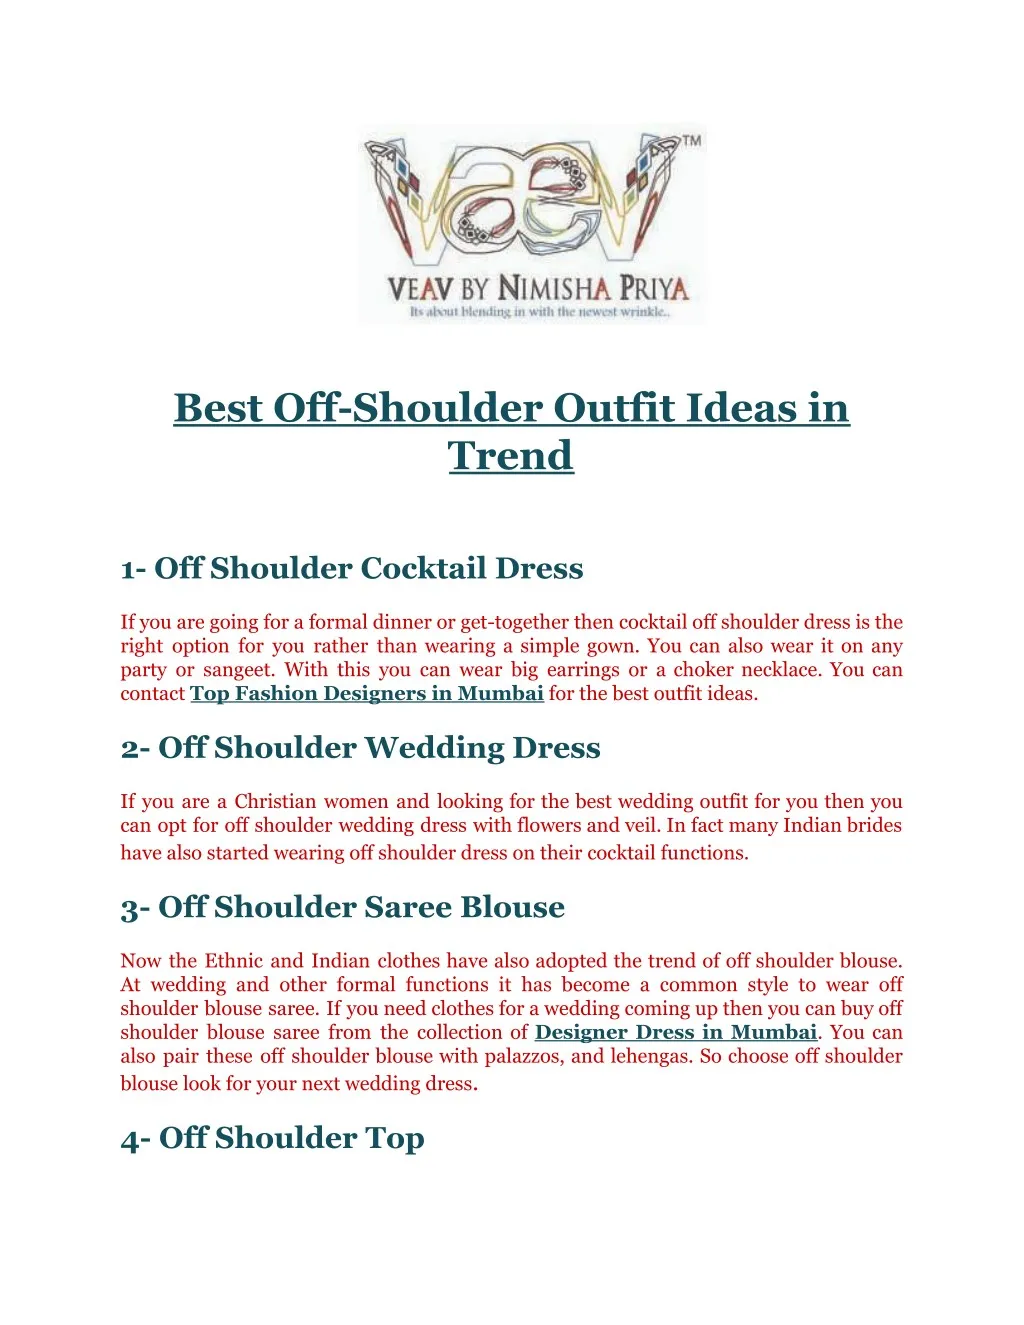 best off shoulder outfit ideas in trend